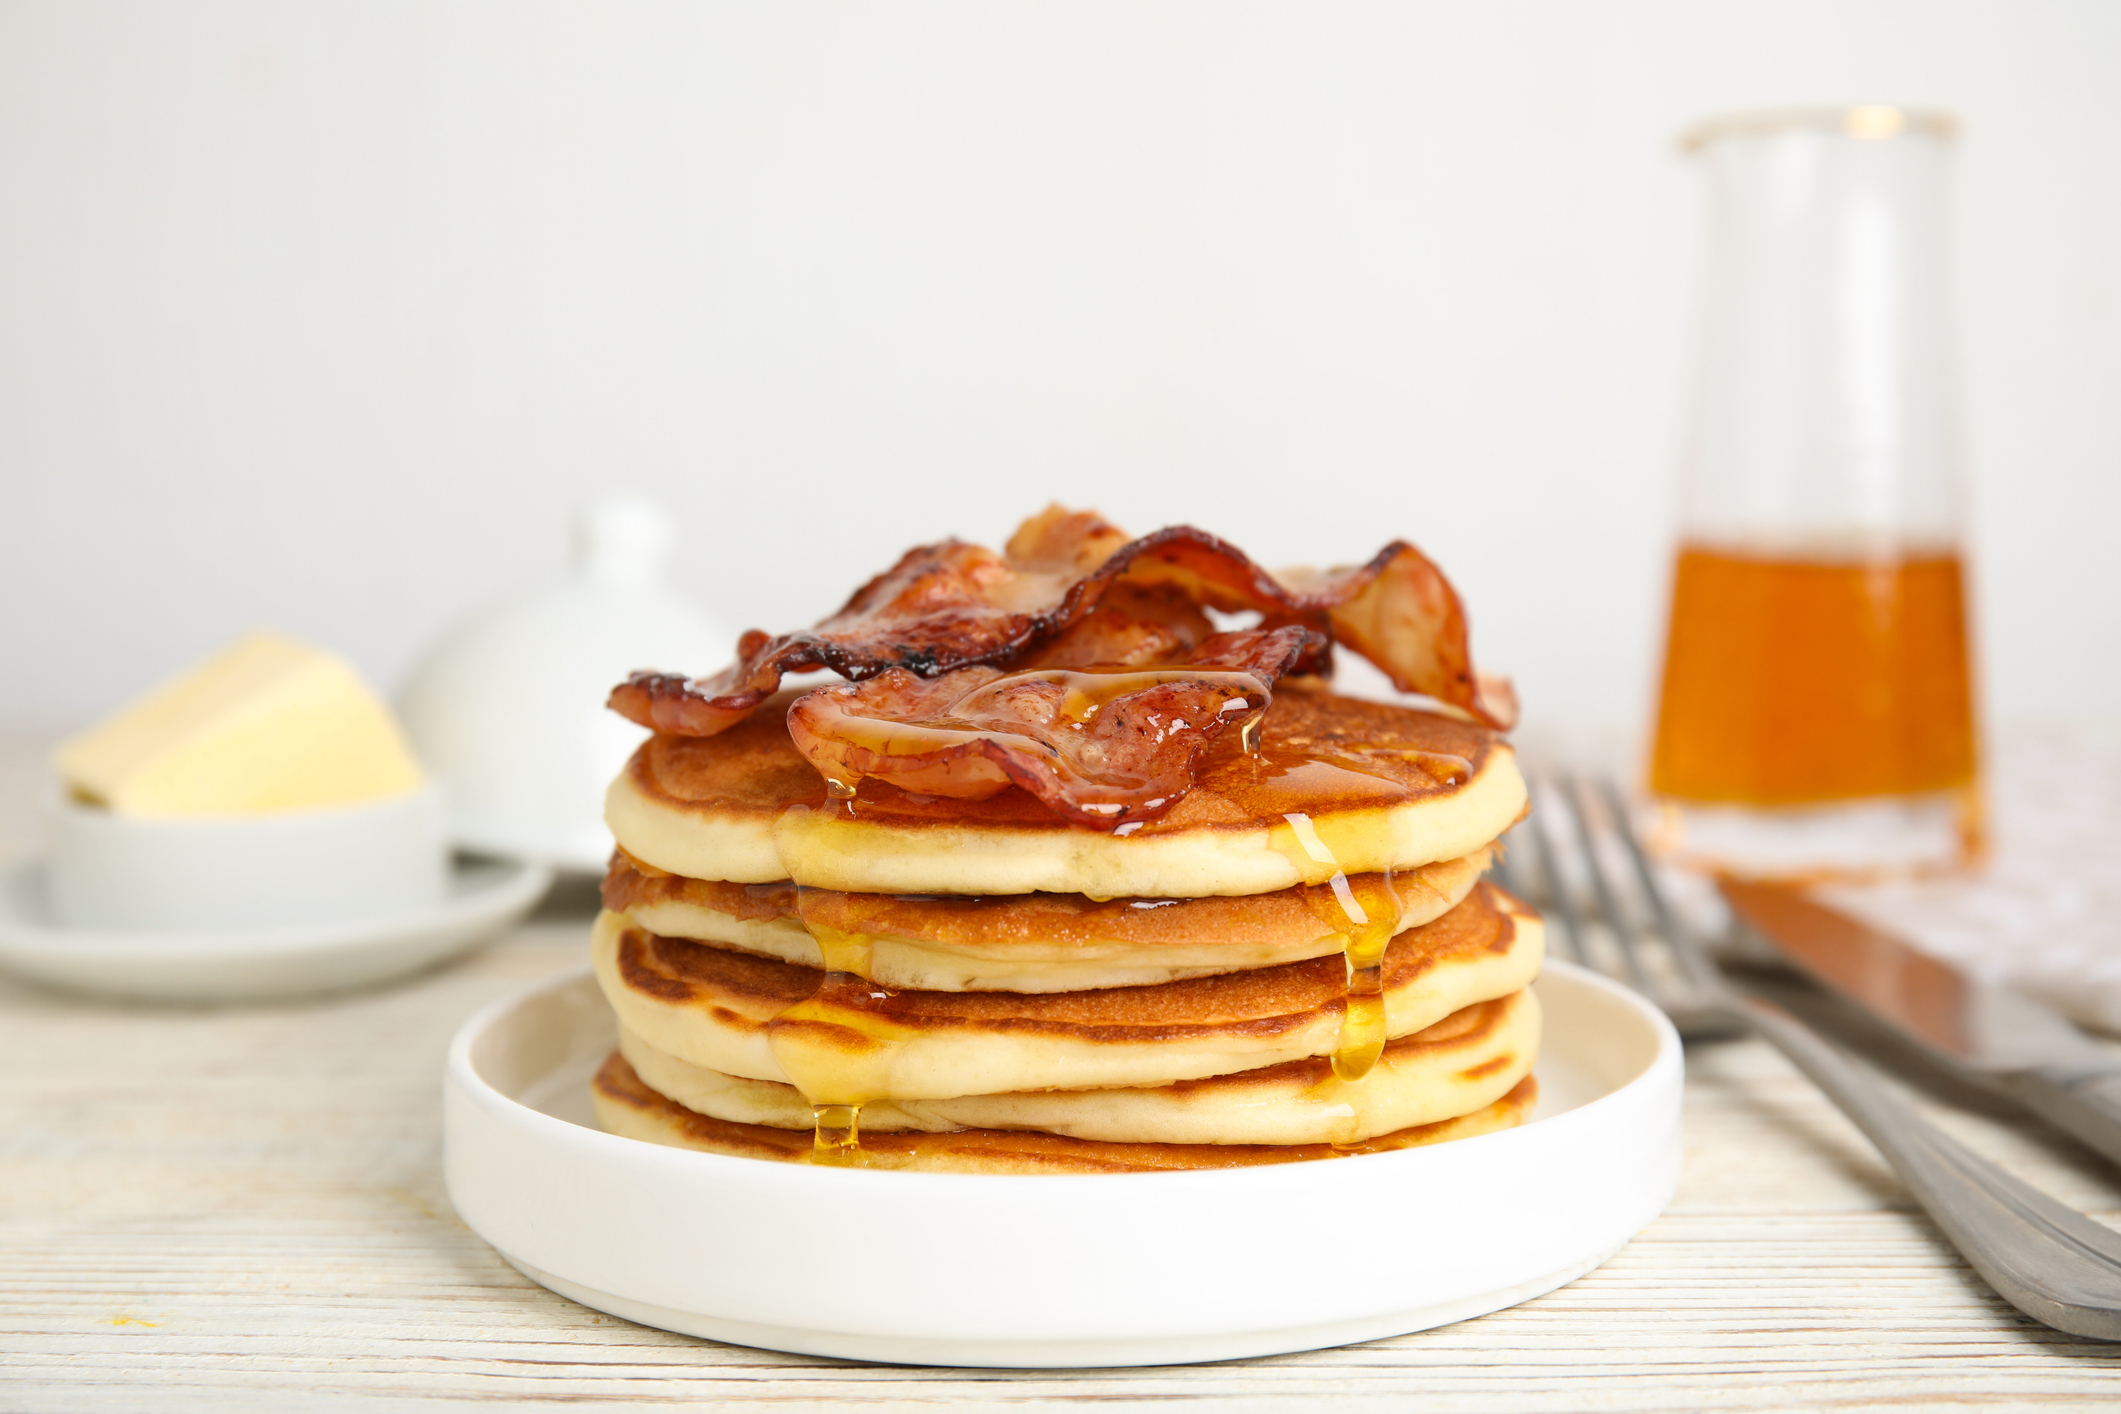 Stack of pancakes with syrup and bacon on top, beside butter and a syrup pitcher